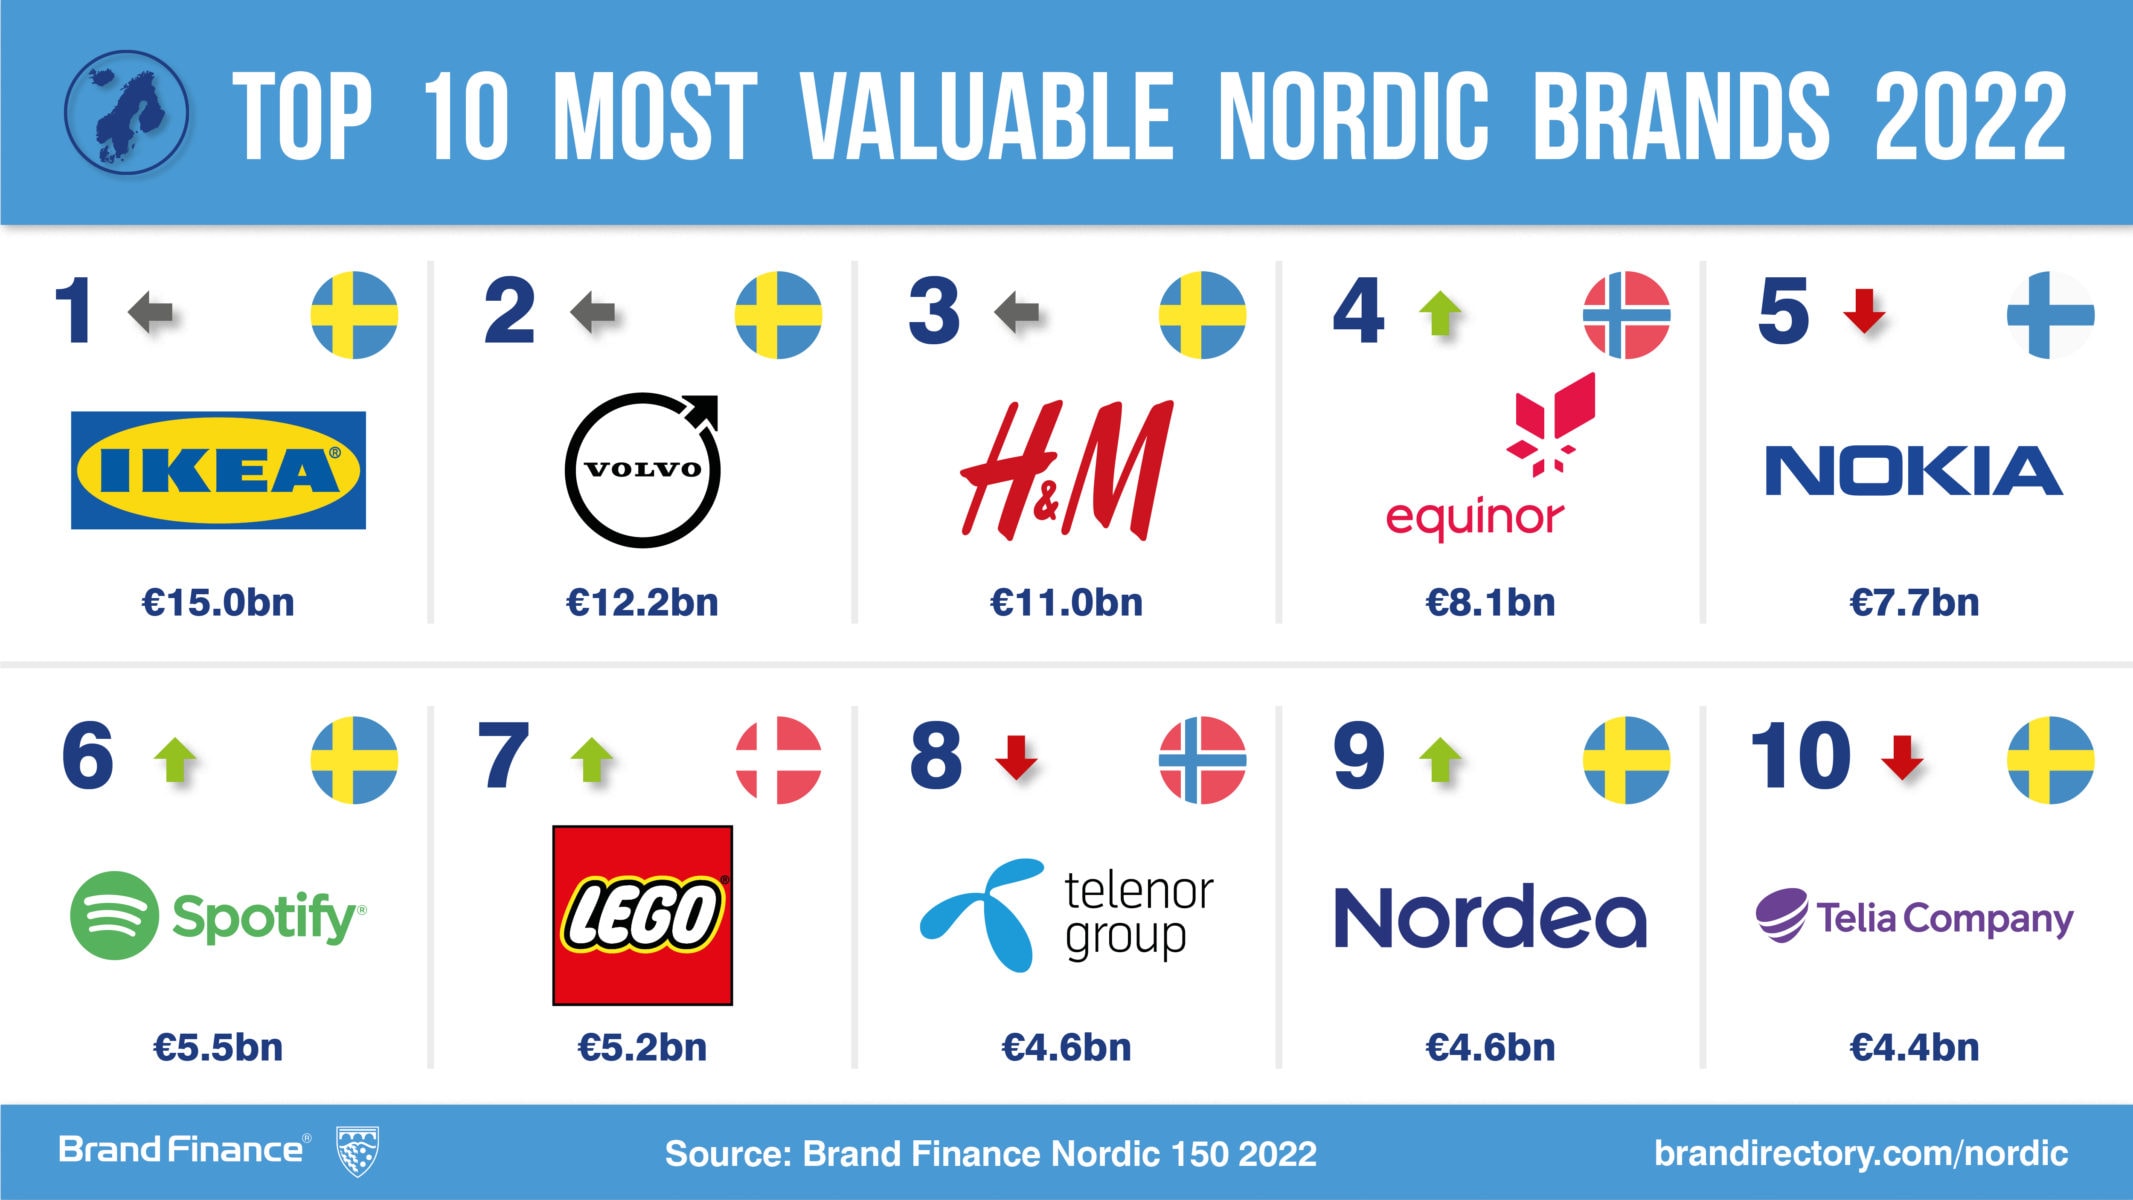 IKEA is unbeatable with decade long reign as the top Nordic brand ...